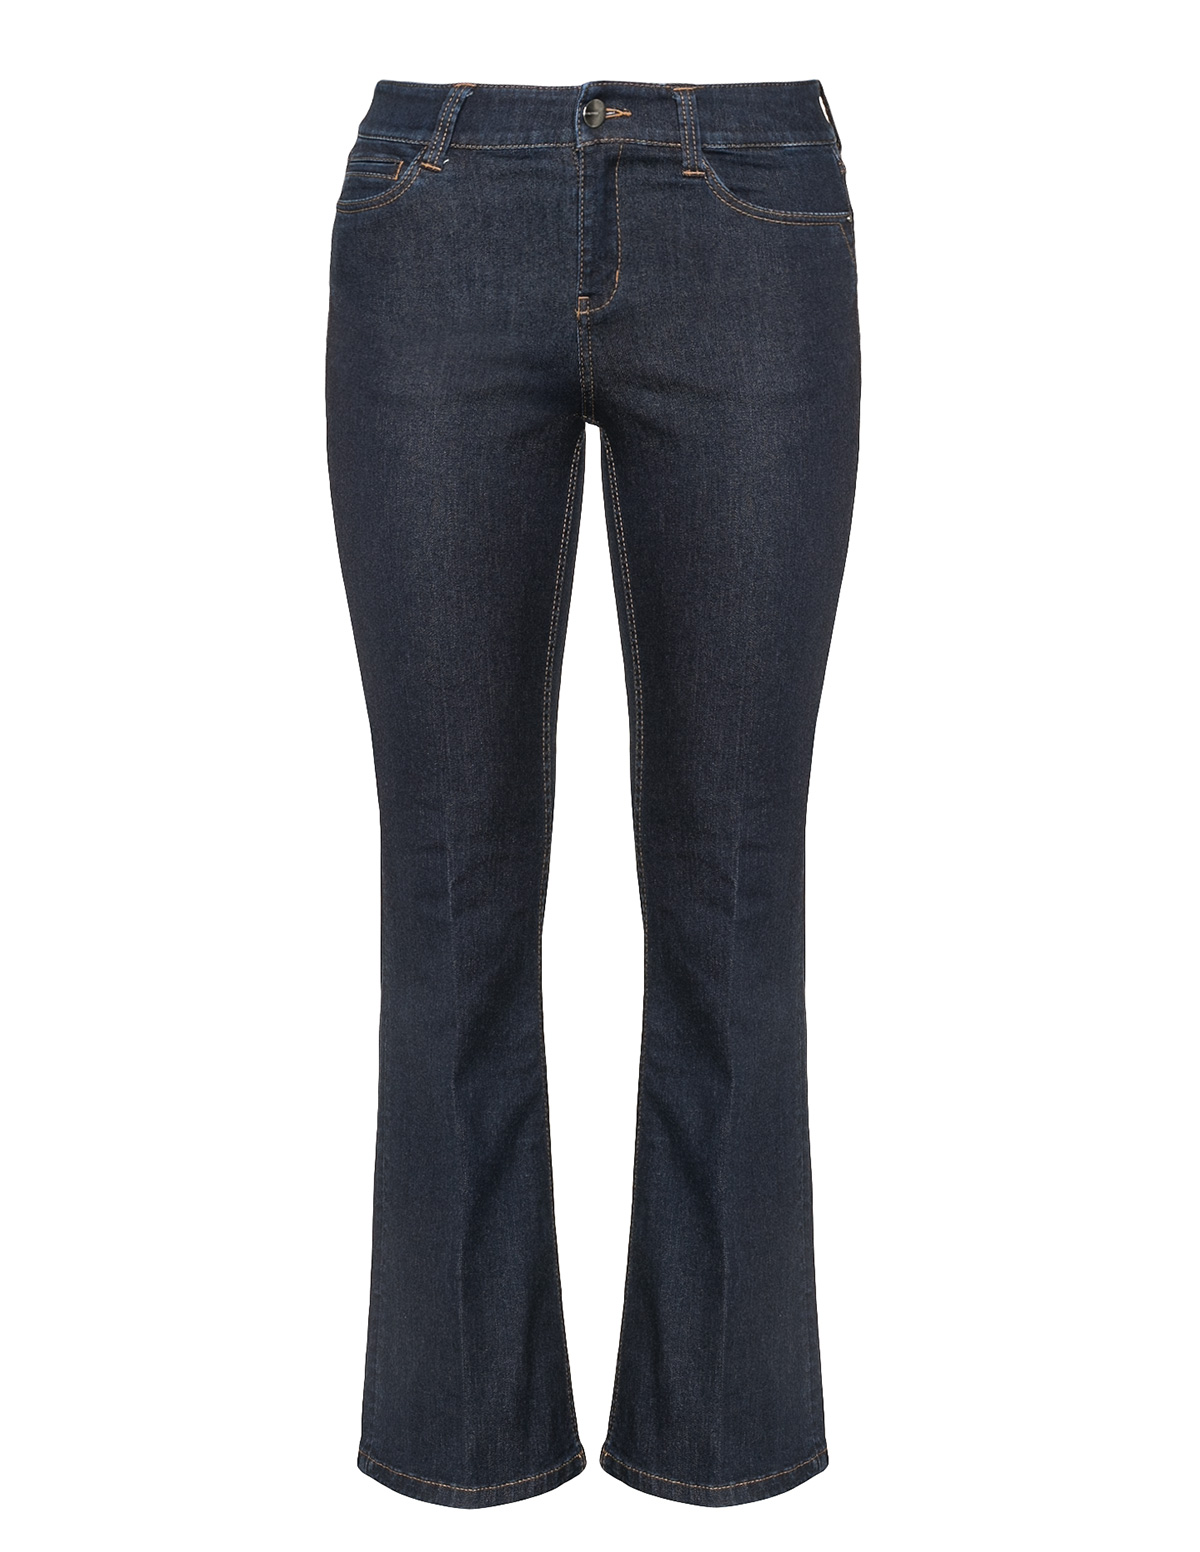 Bootcut jeans by
Triangle